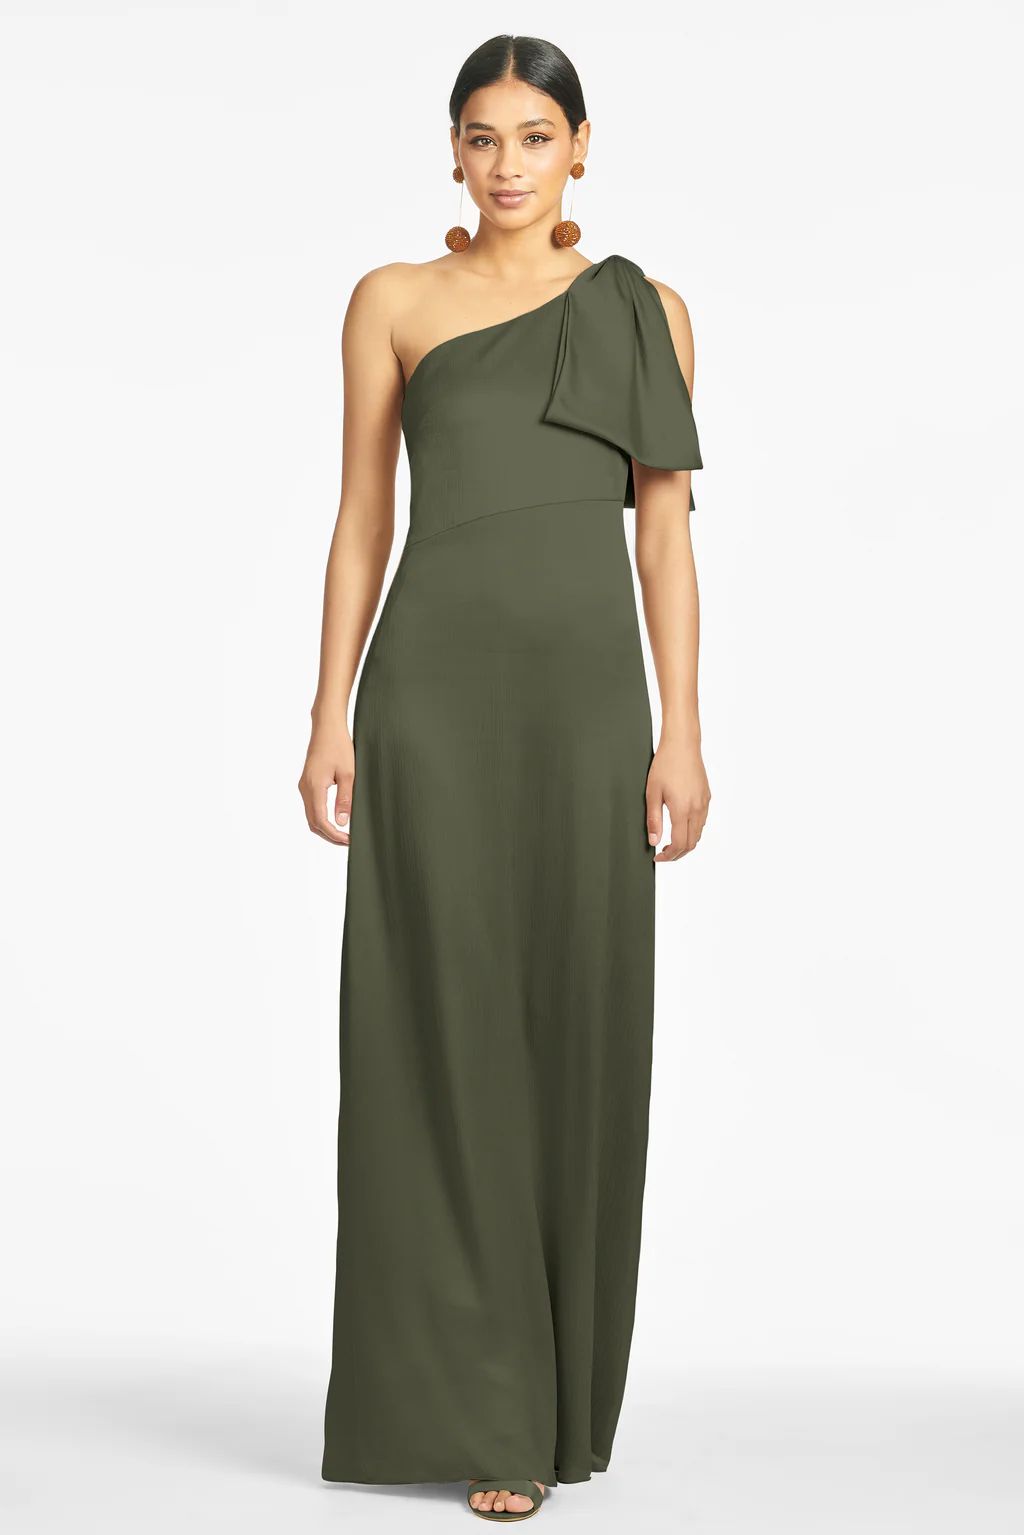 Chelsea Gown - Moss Green | Sachin and Babi